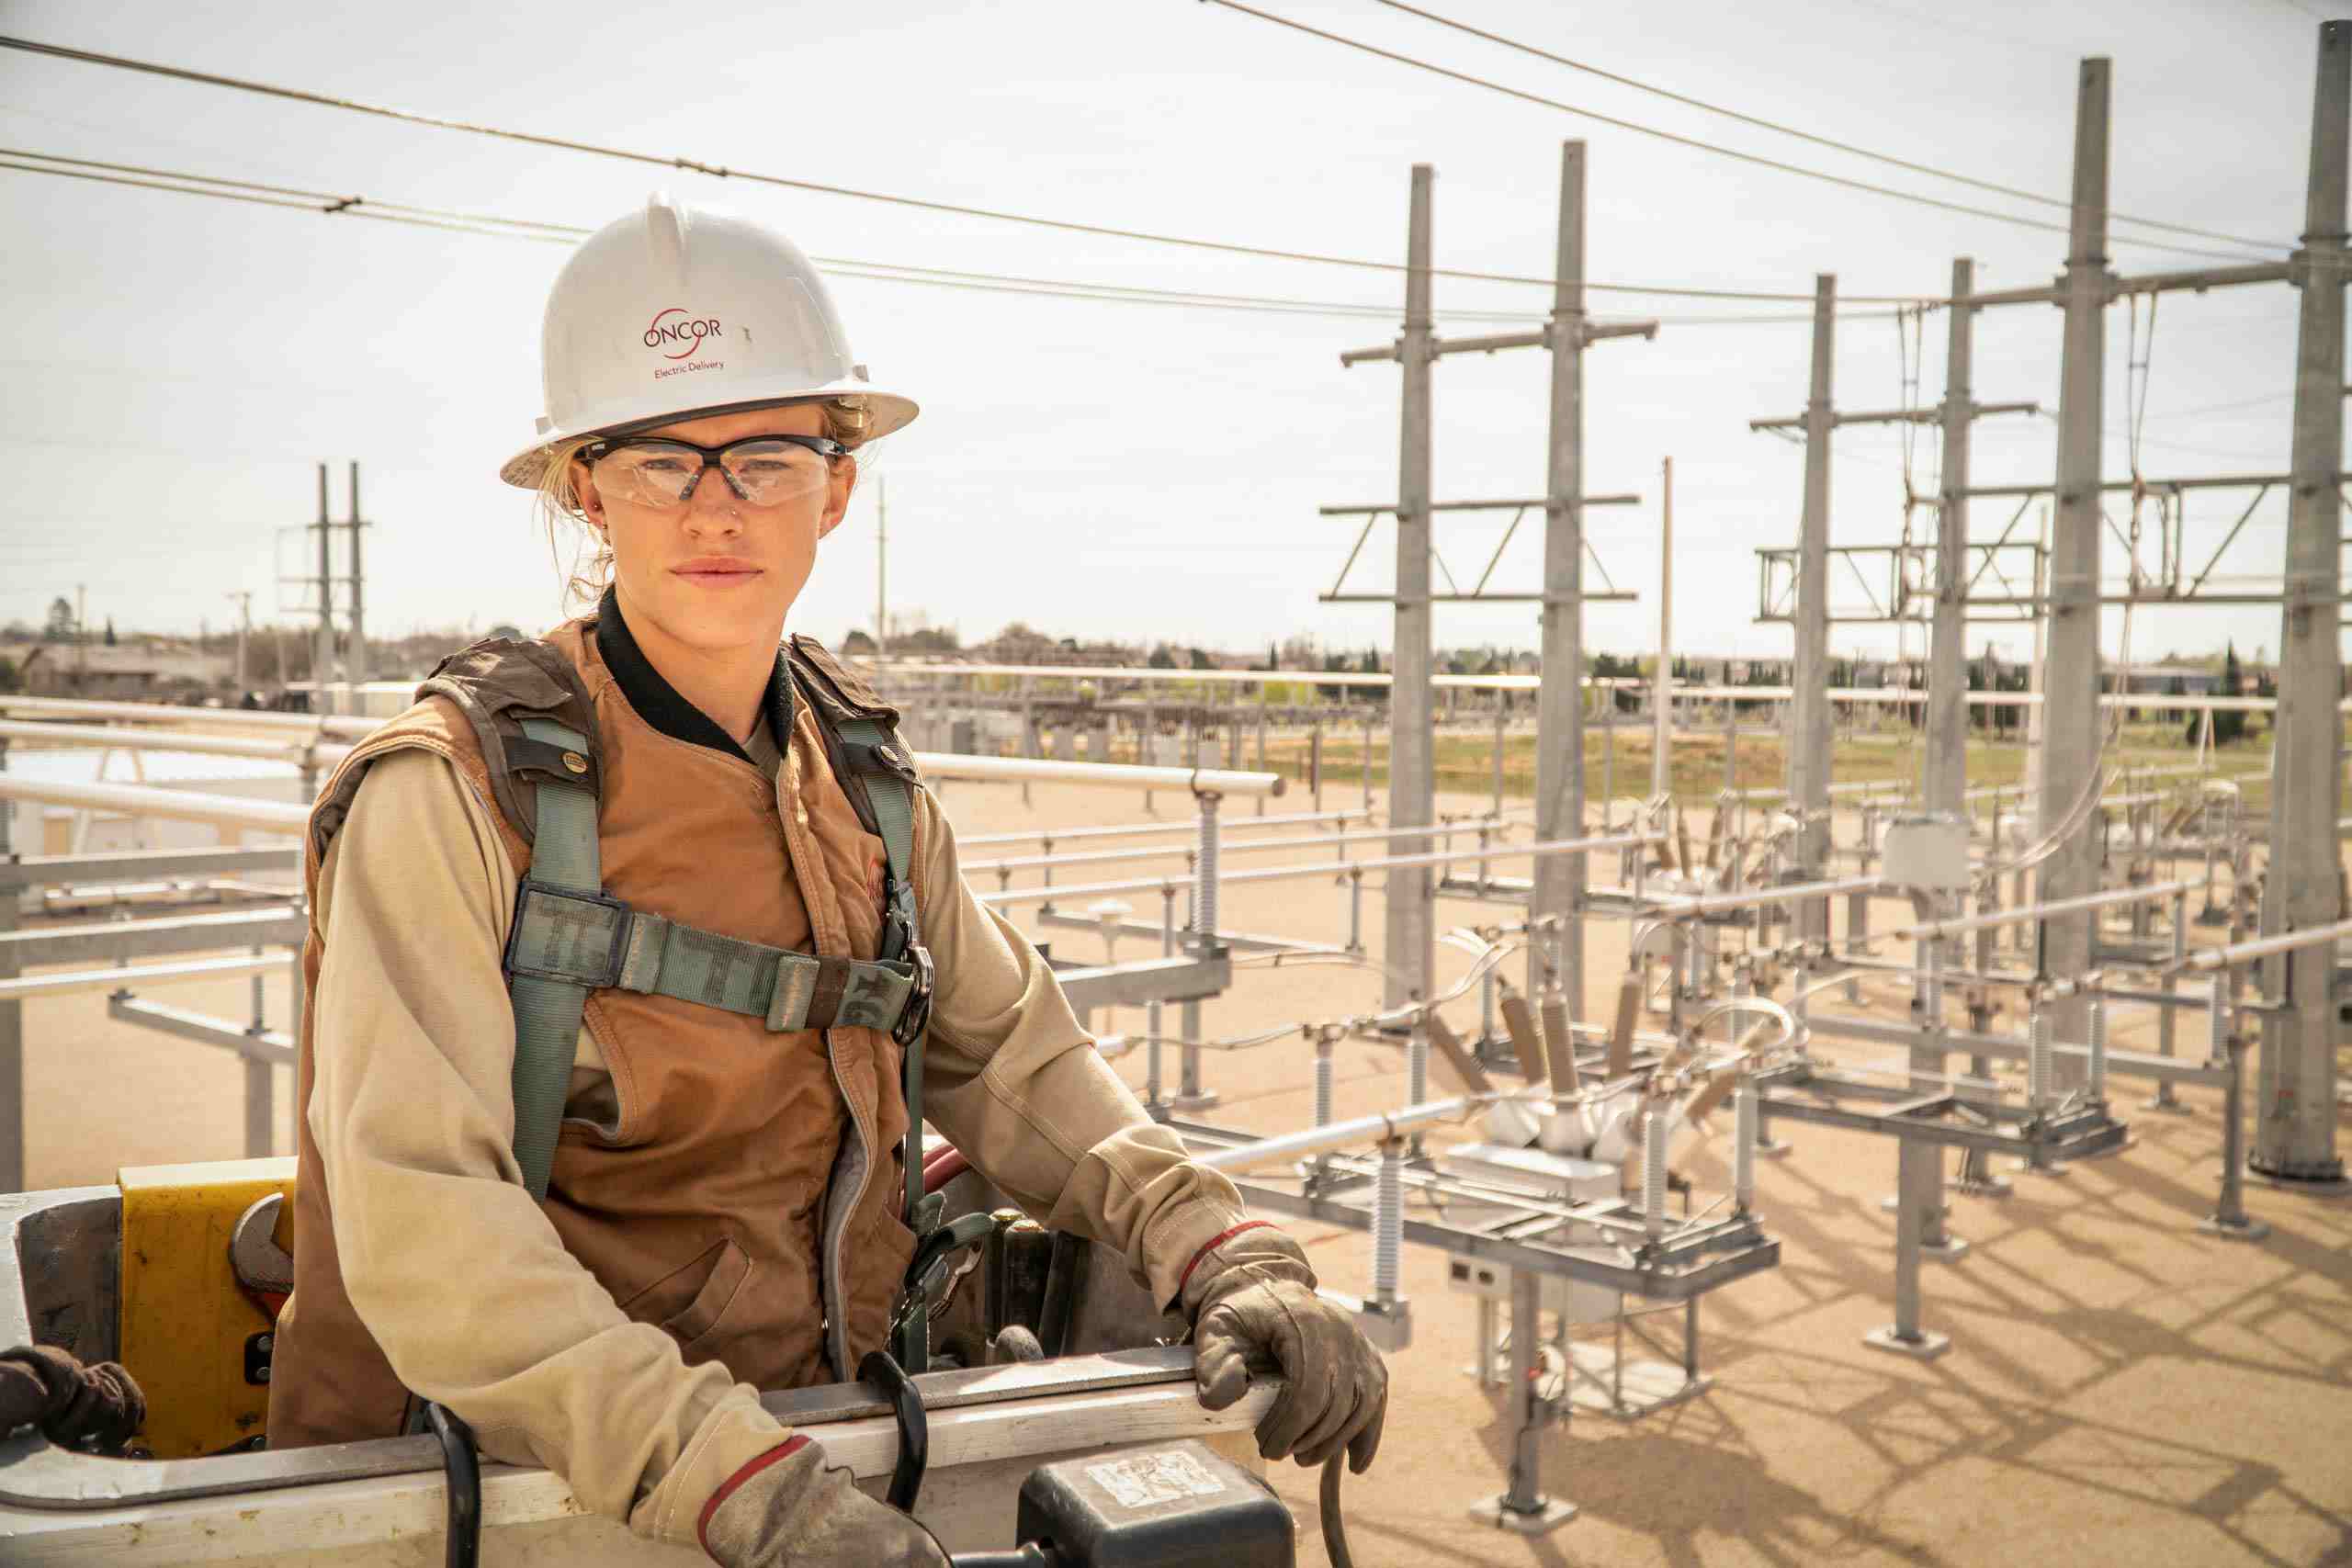 Powerful Corporate Portrait photography of female Oncor employee